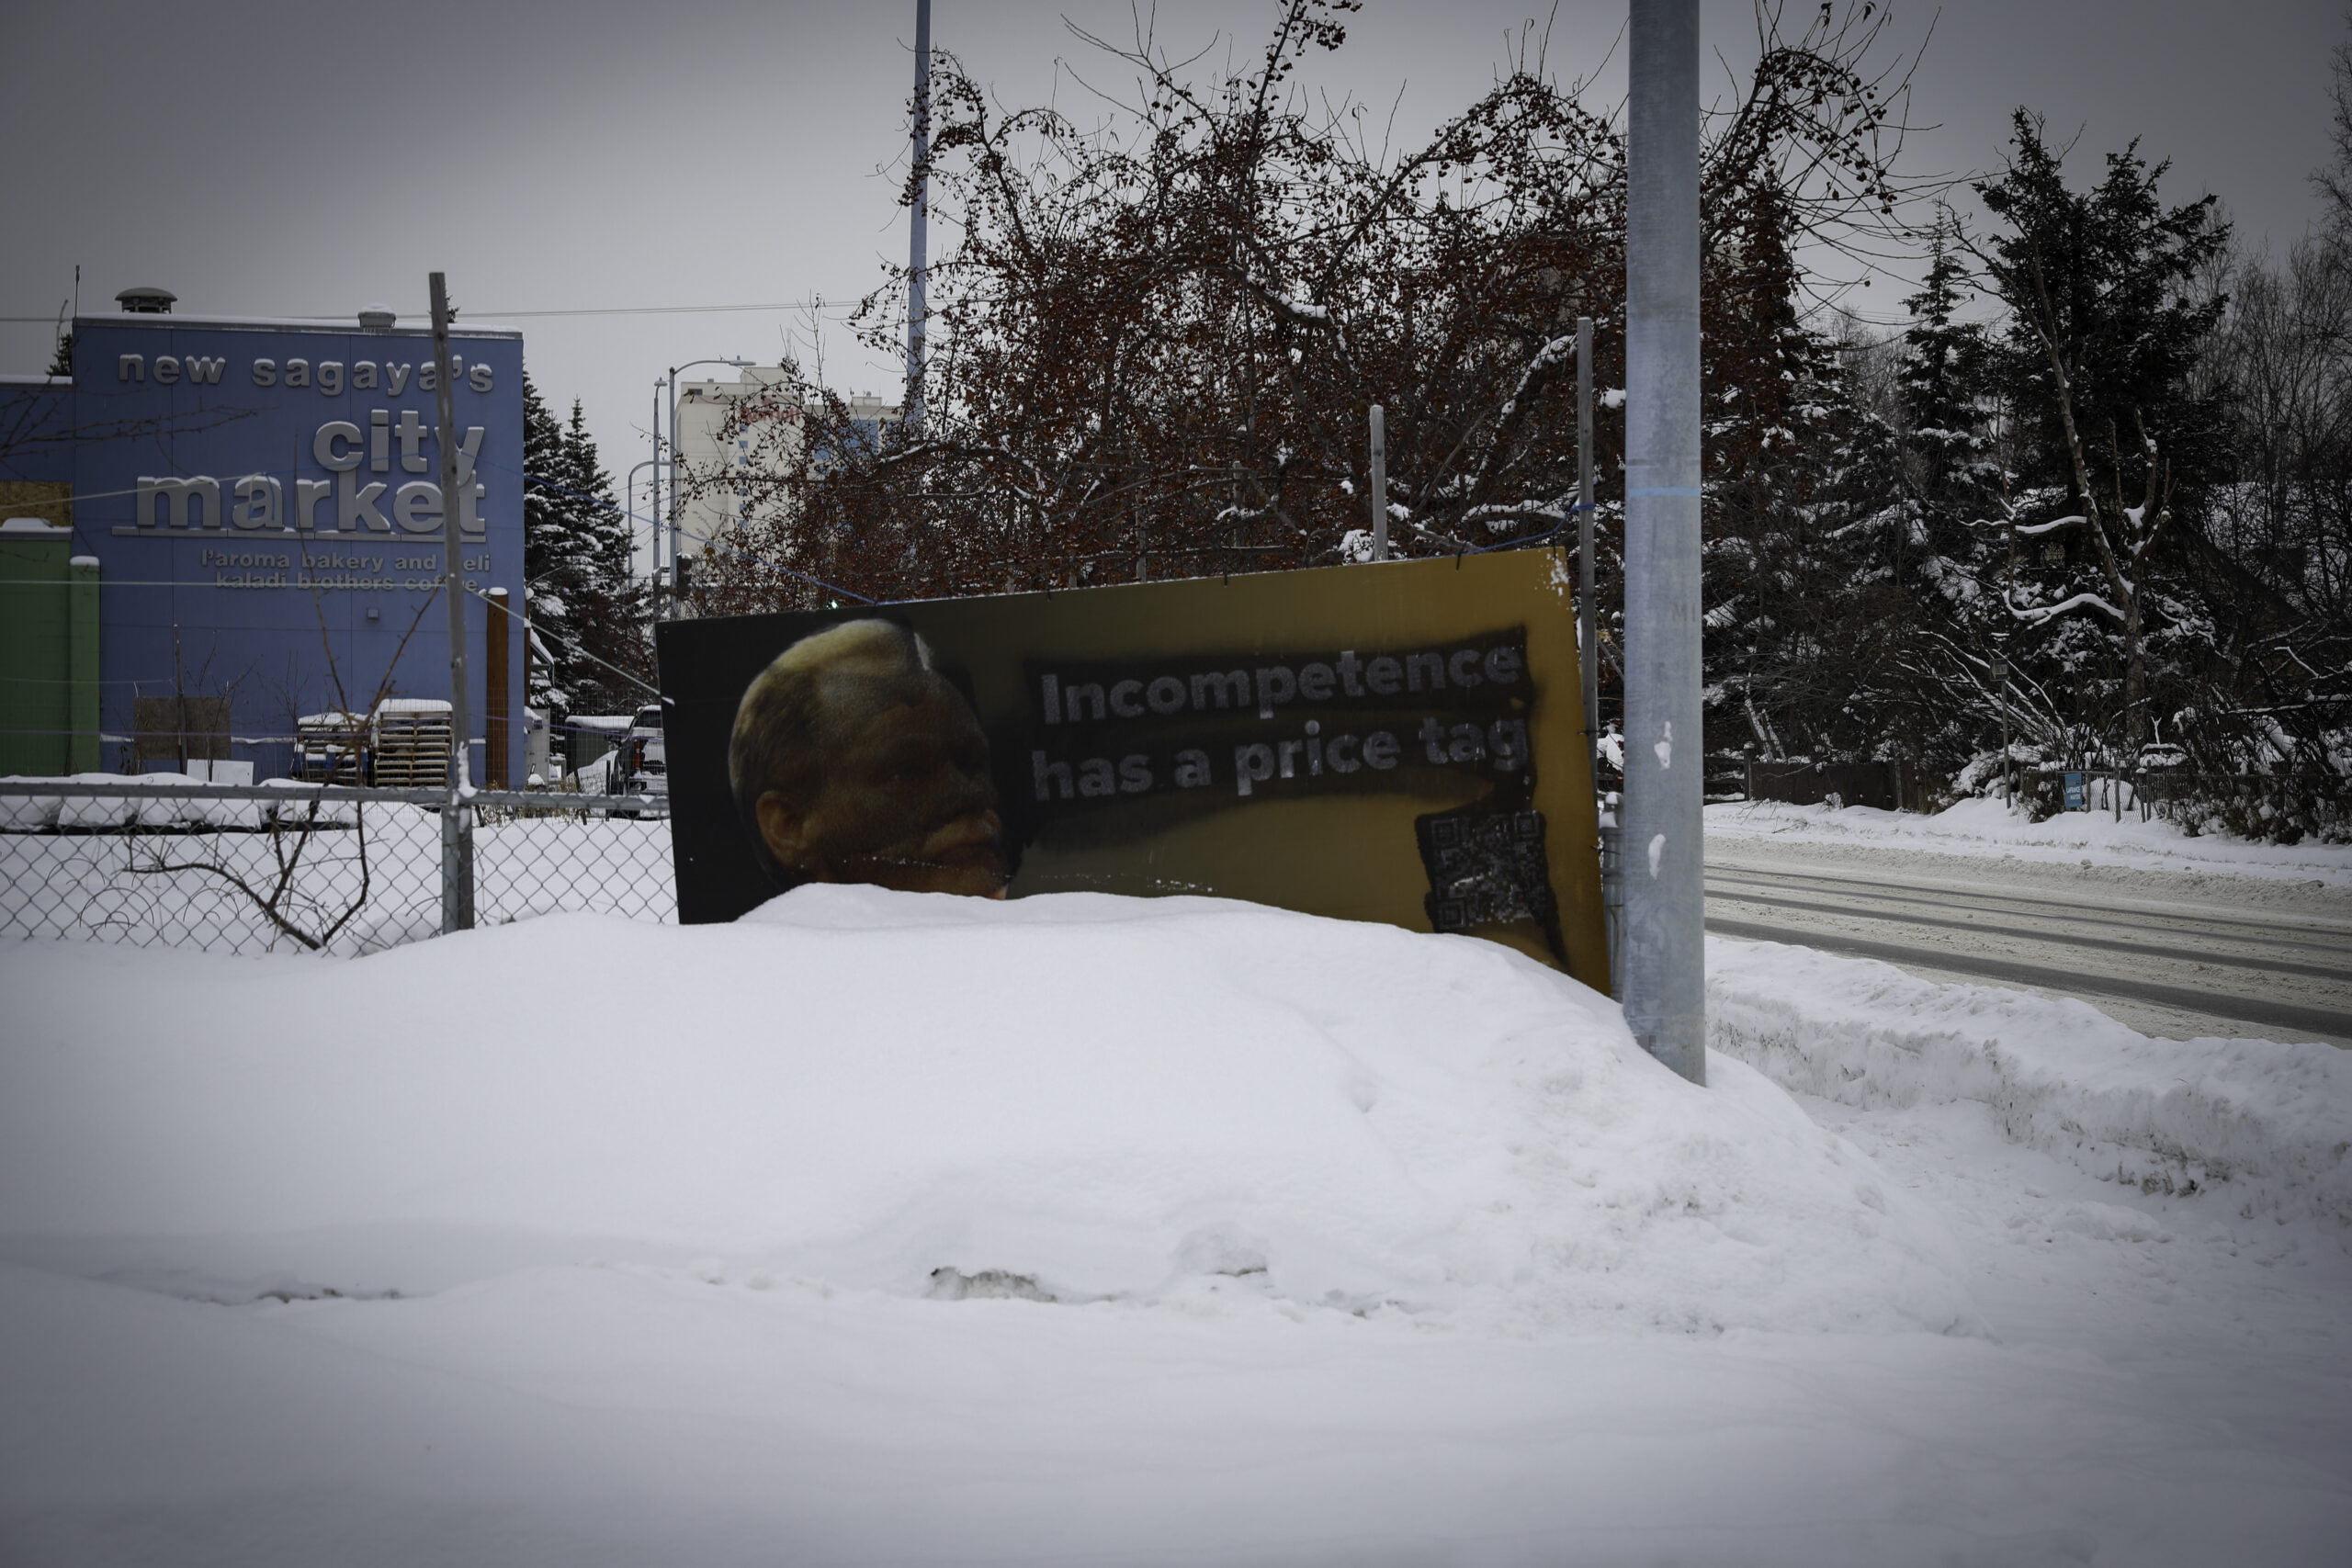 A sign that says, "Incompetence has a price tag" is spray painted. It is standing half way buried in snow near a light pole along a wired fence.